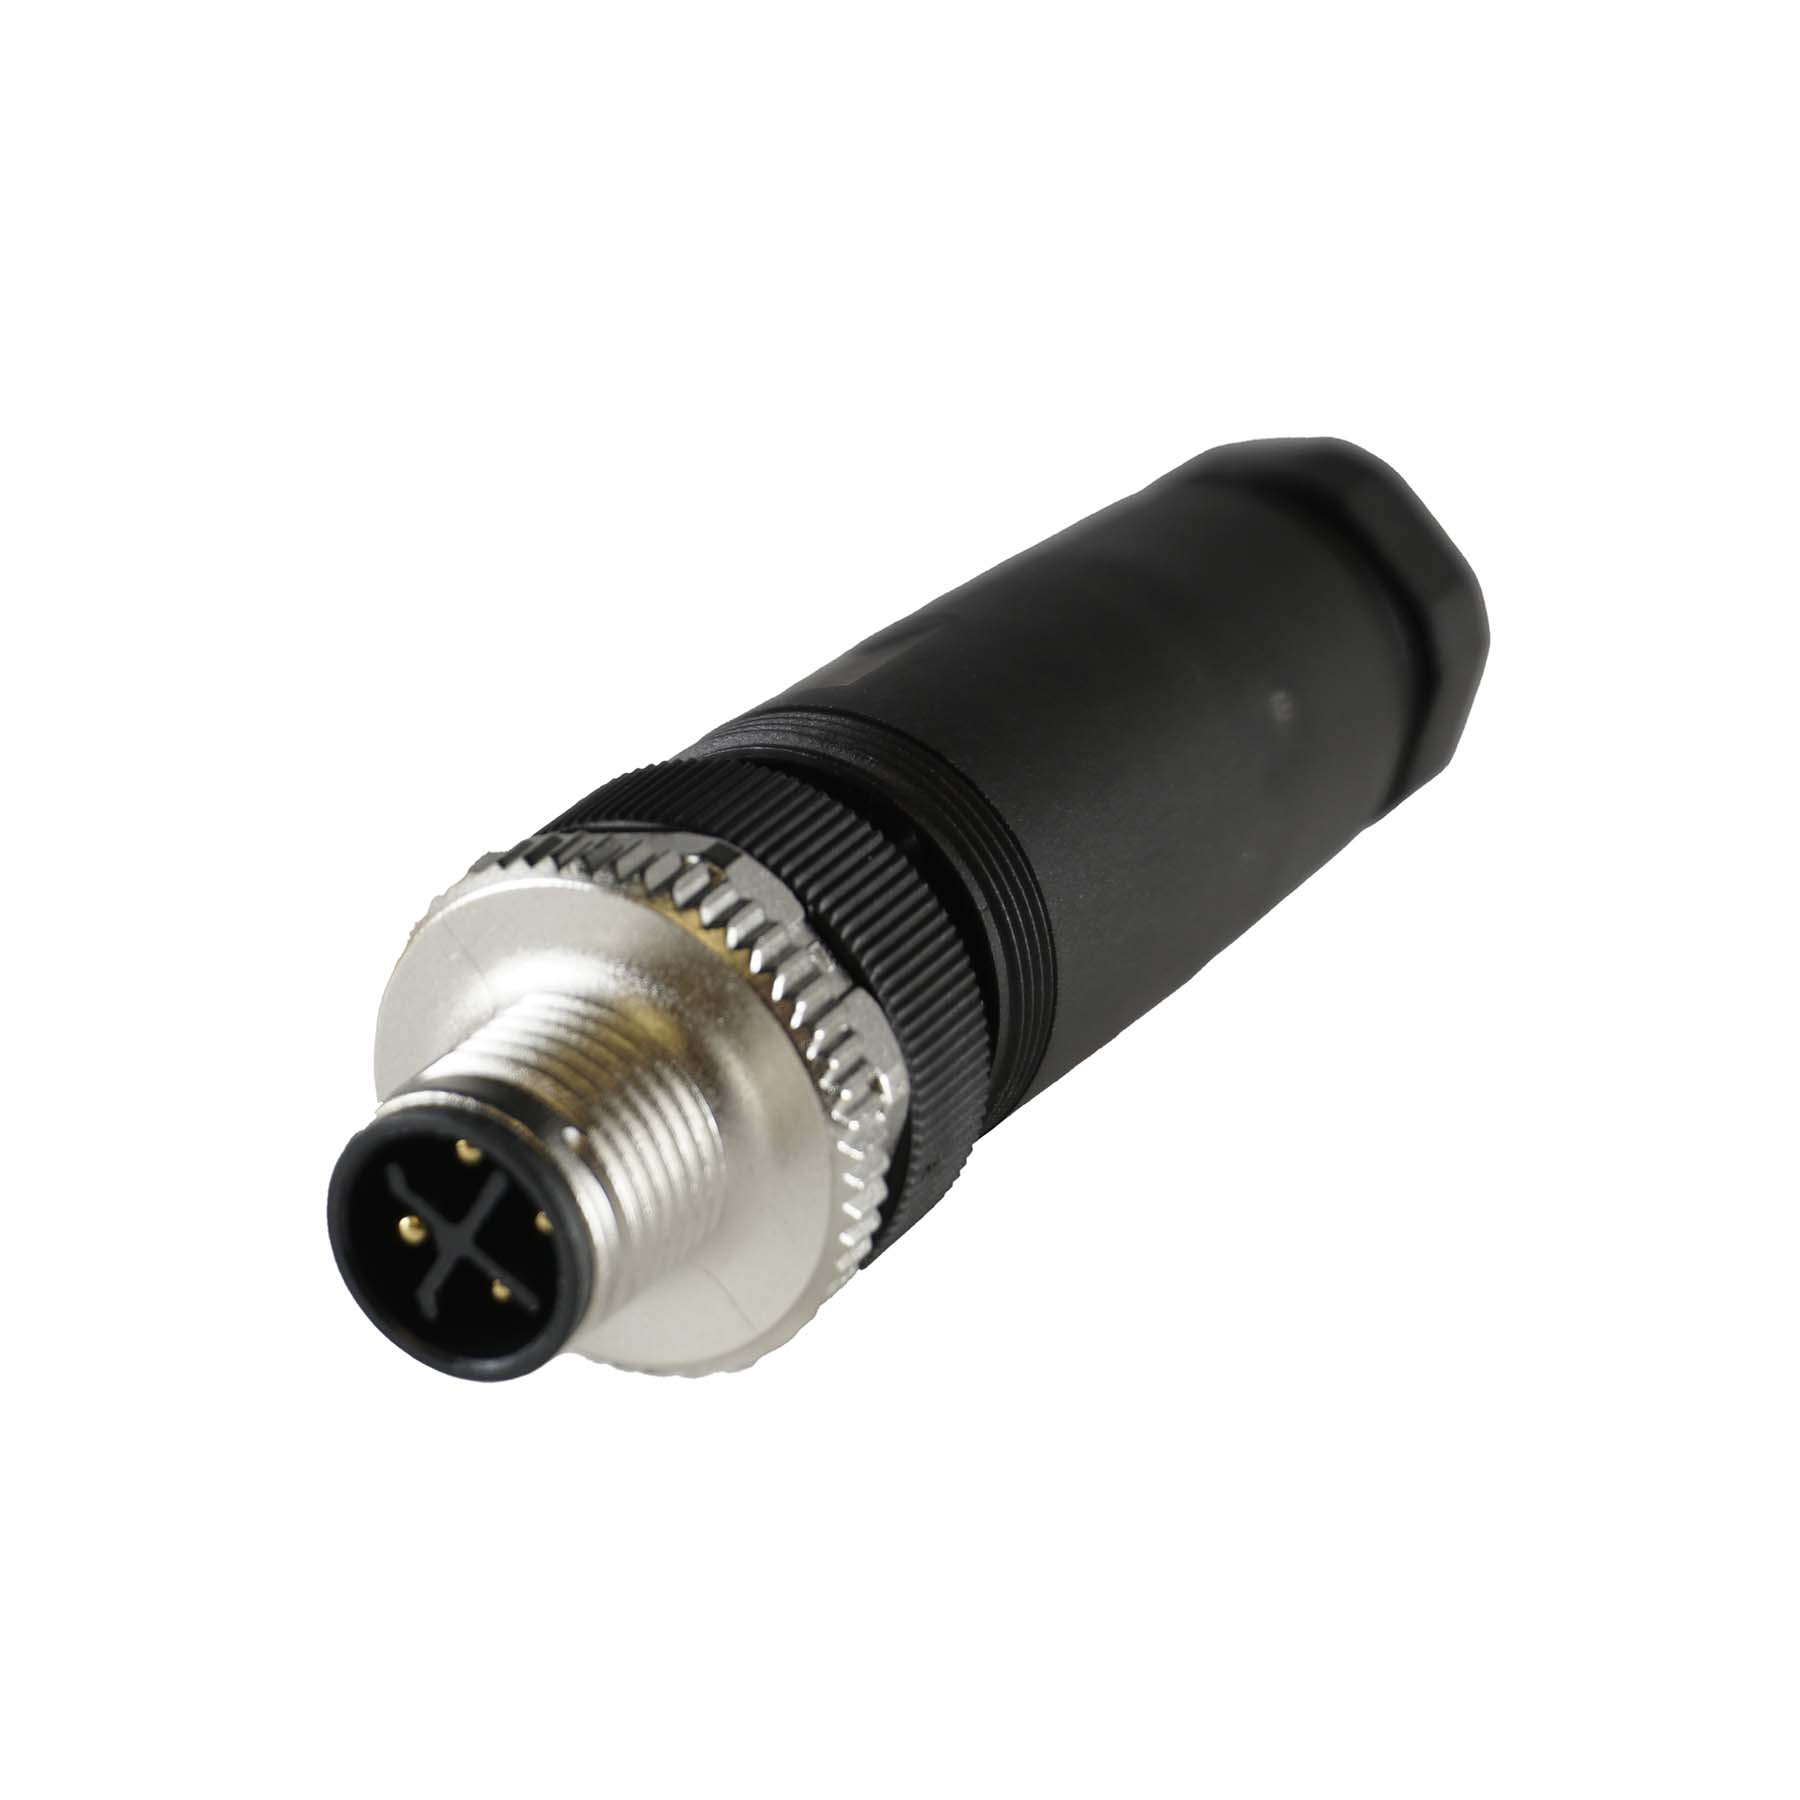 5-PIN, A-CODED CONNECTOR, FOR CABLE DIAM. 4-6MM, 60VDC MAX (THROUGH-WIRE)